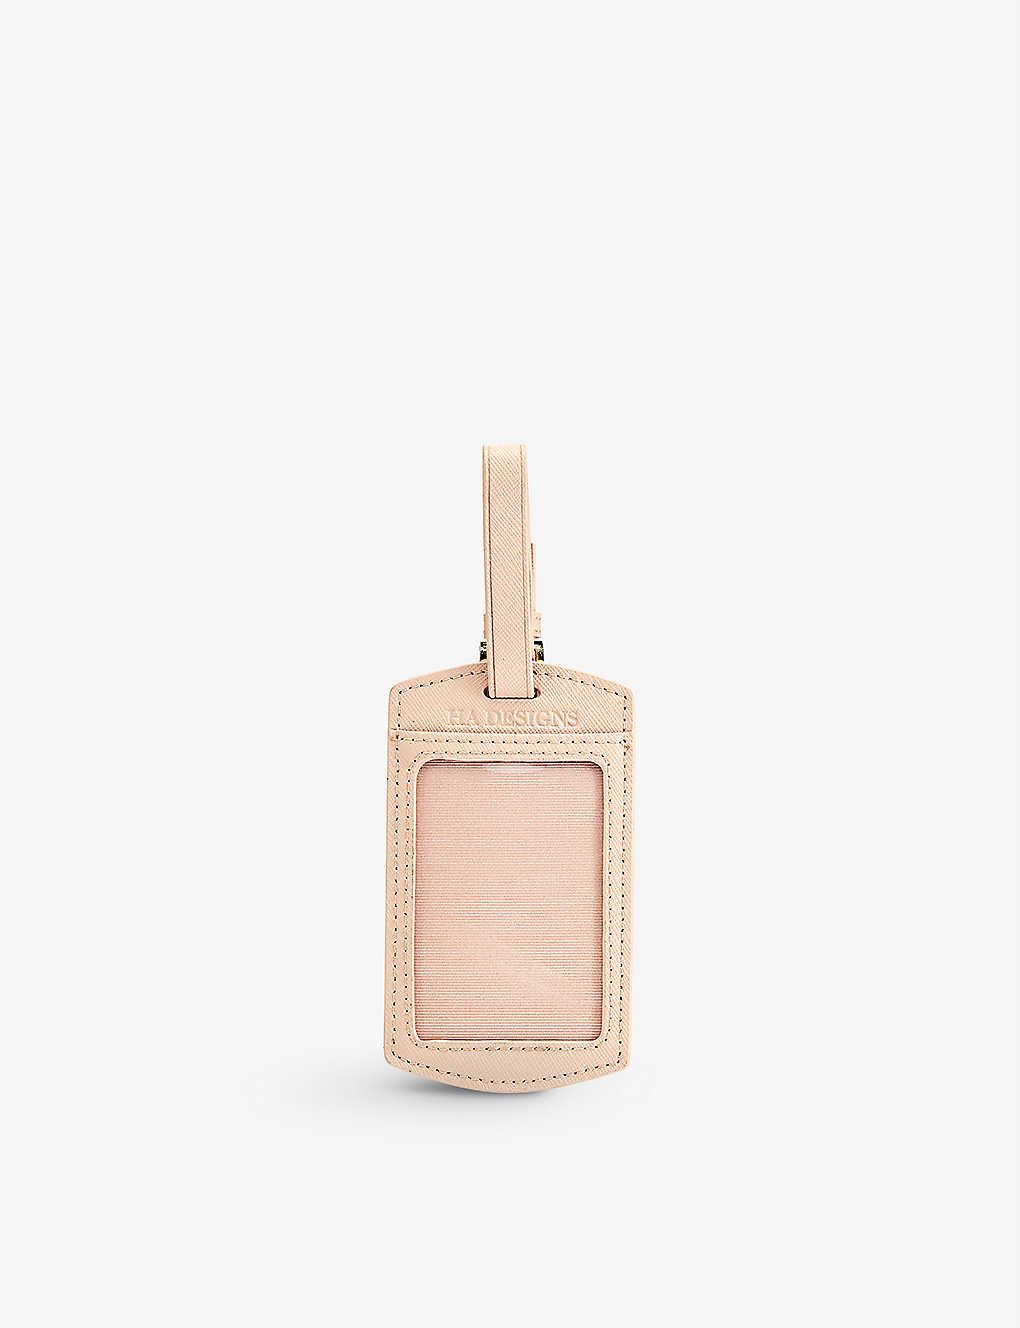 H A DESIGNS Personalised leather luggage tag | Selfridges